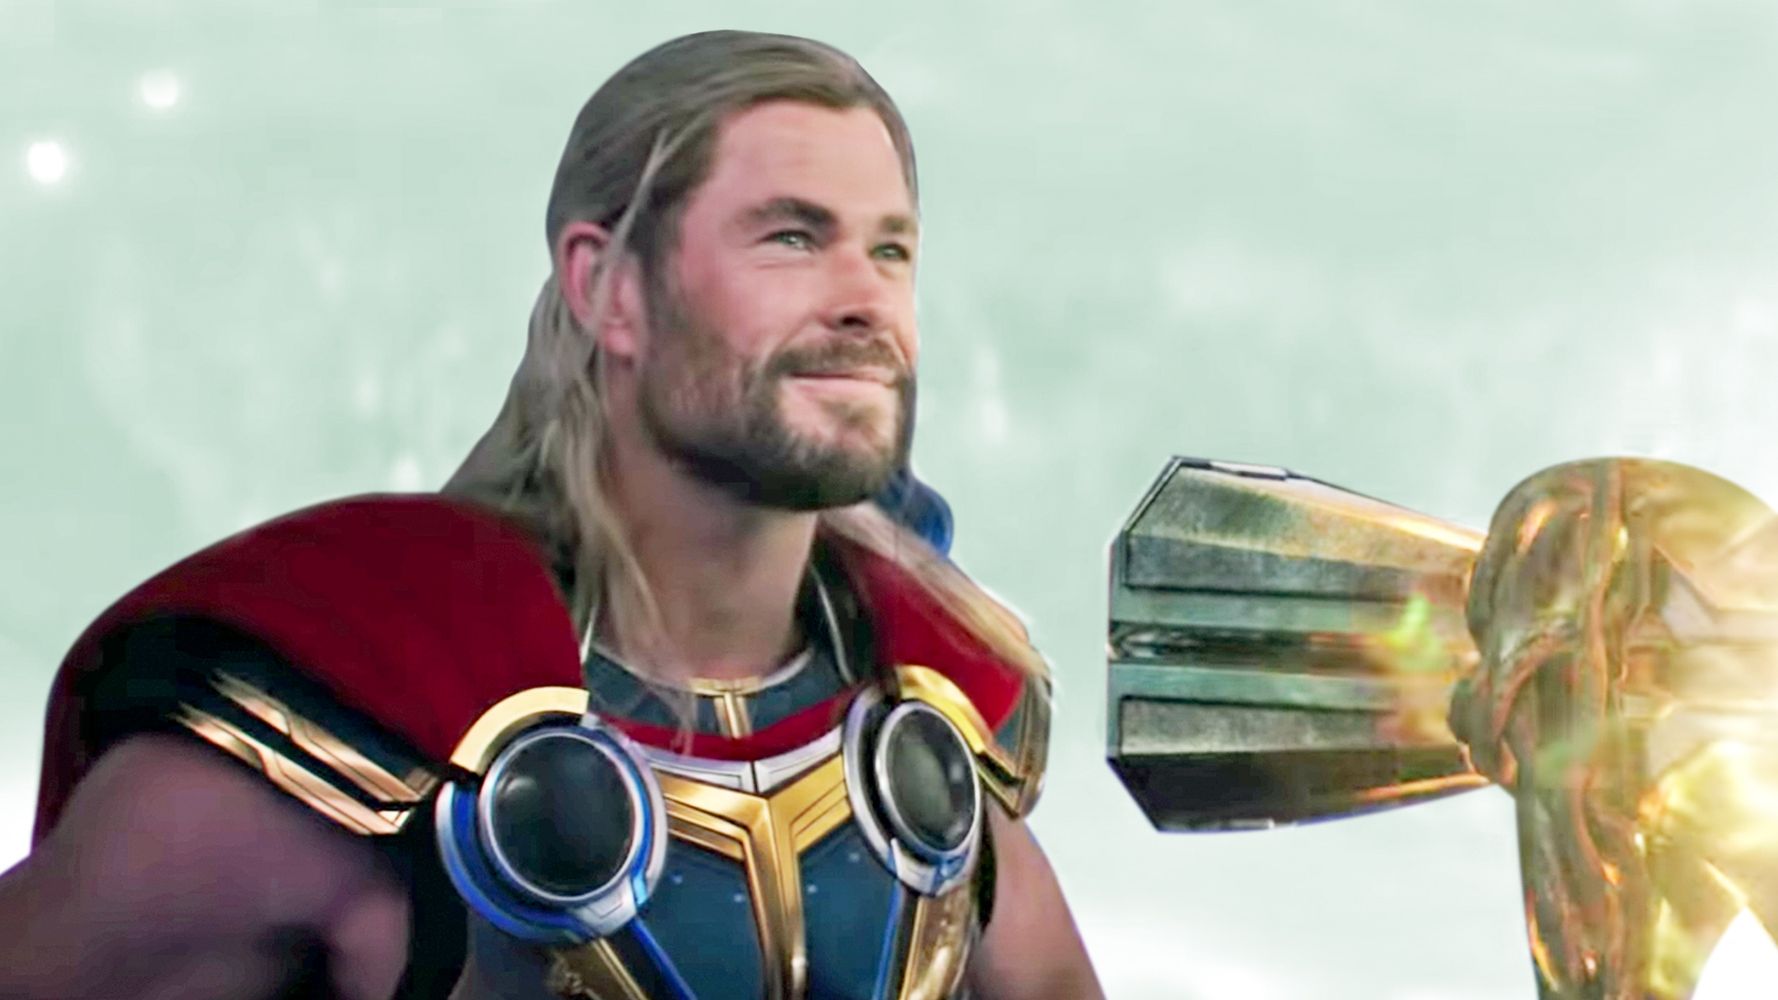 Thor: Love and Thunder' Rated Third Worst MCU Project to Date